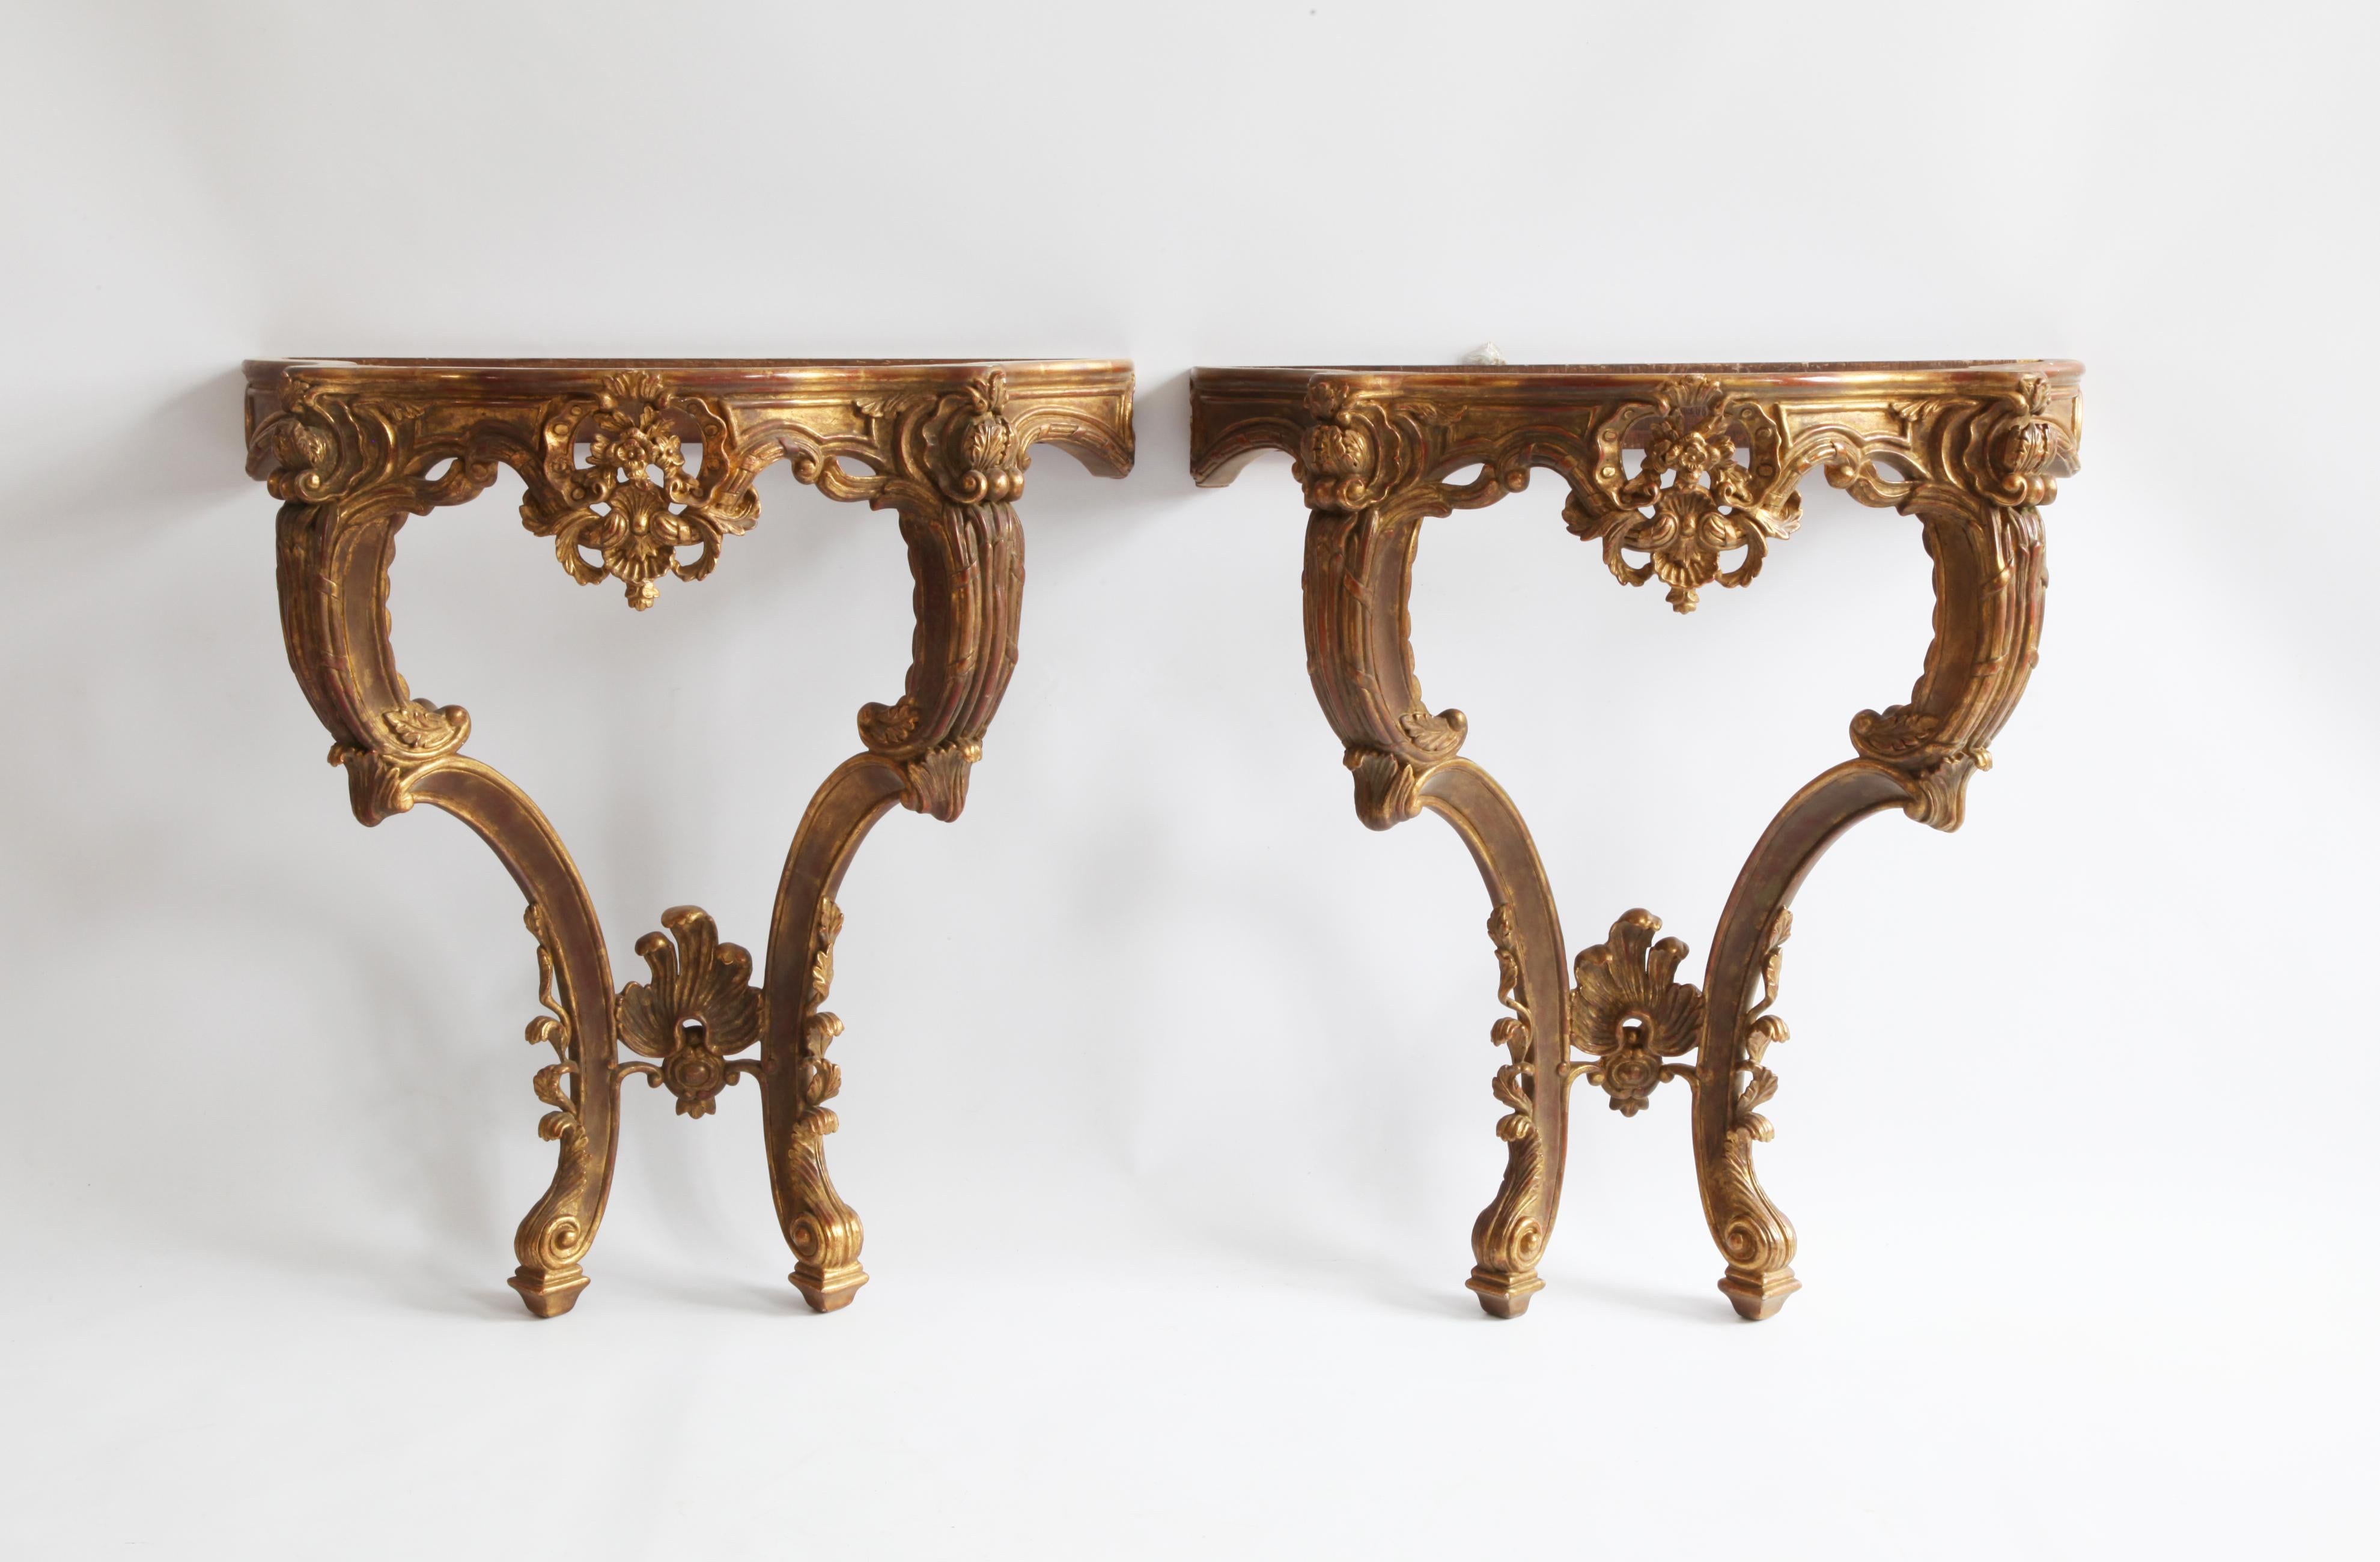 Pair of Rococo style consoles: Hand-carved by master craftsmen and finished with an antique gilded patina using traditional methods and materials. 

We have a selection of marble to choose from. (prices on request)